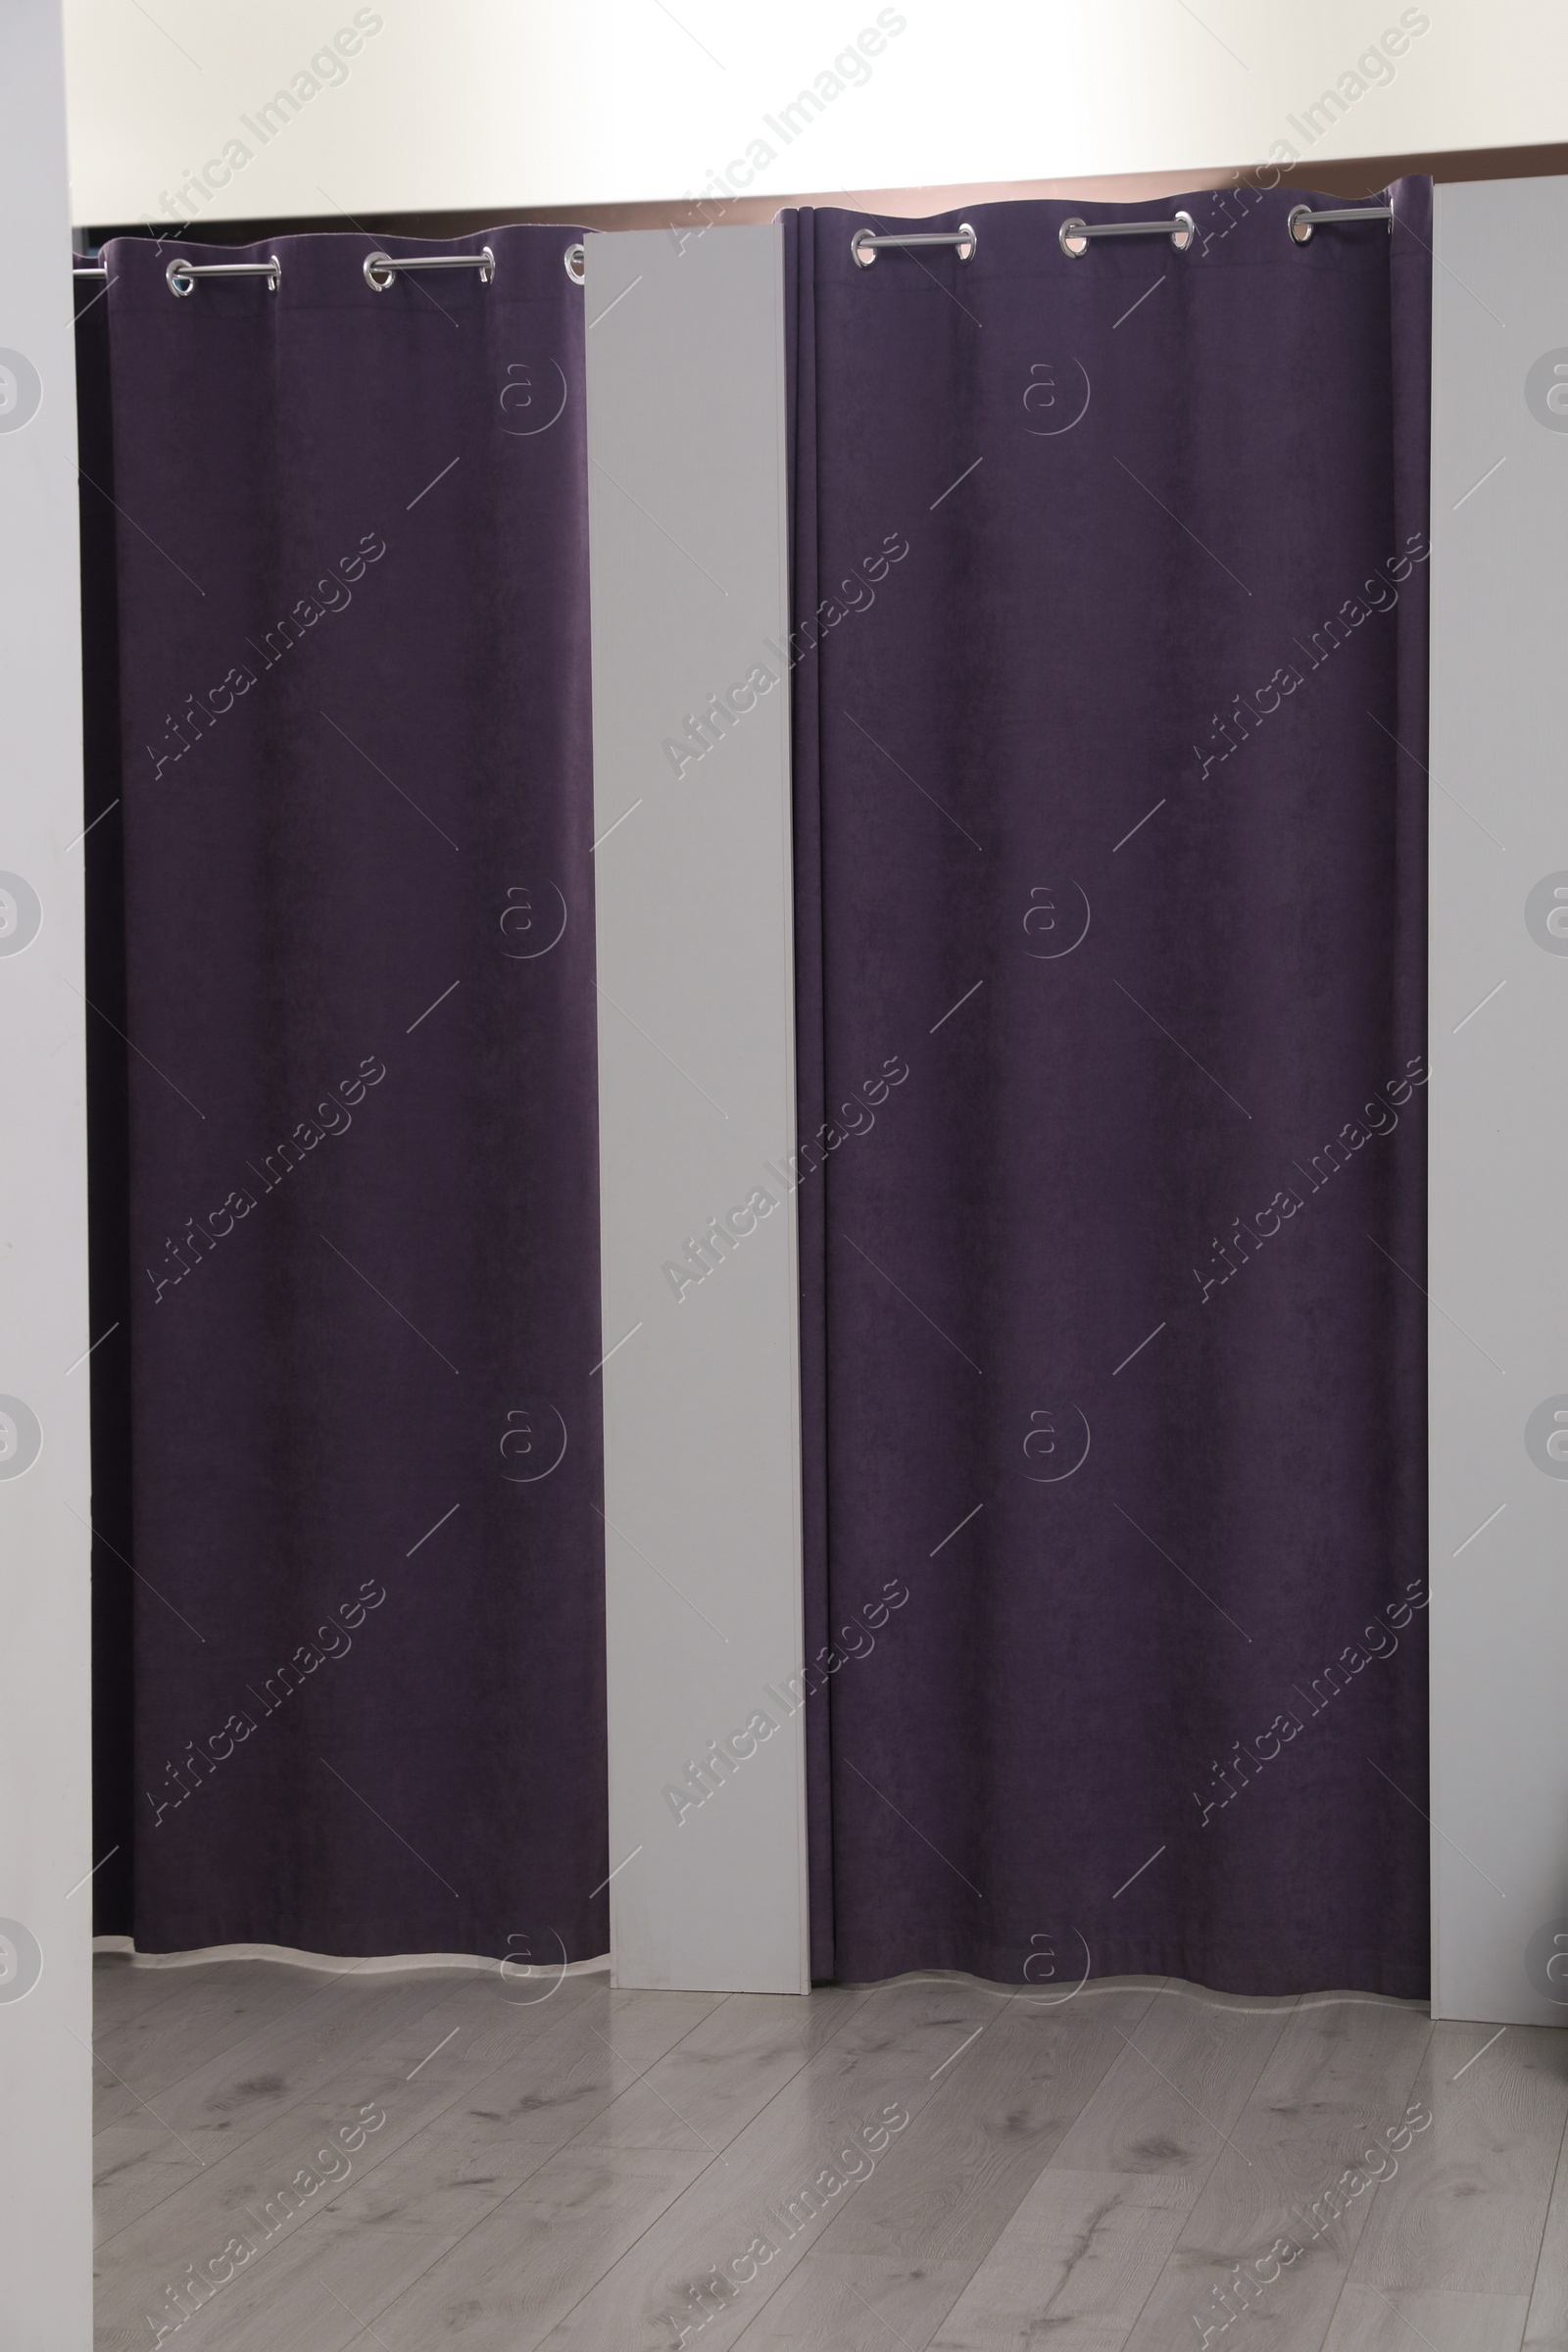 Photo of Dressing rooms with stylish purple curtains in fashion store